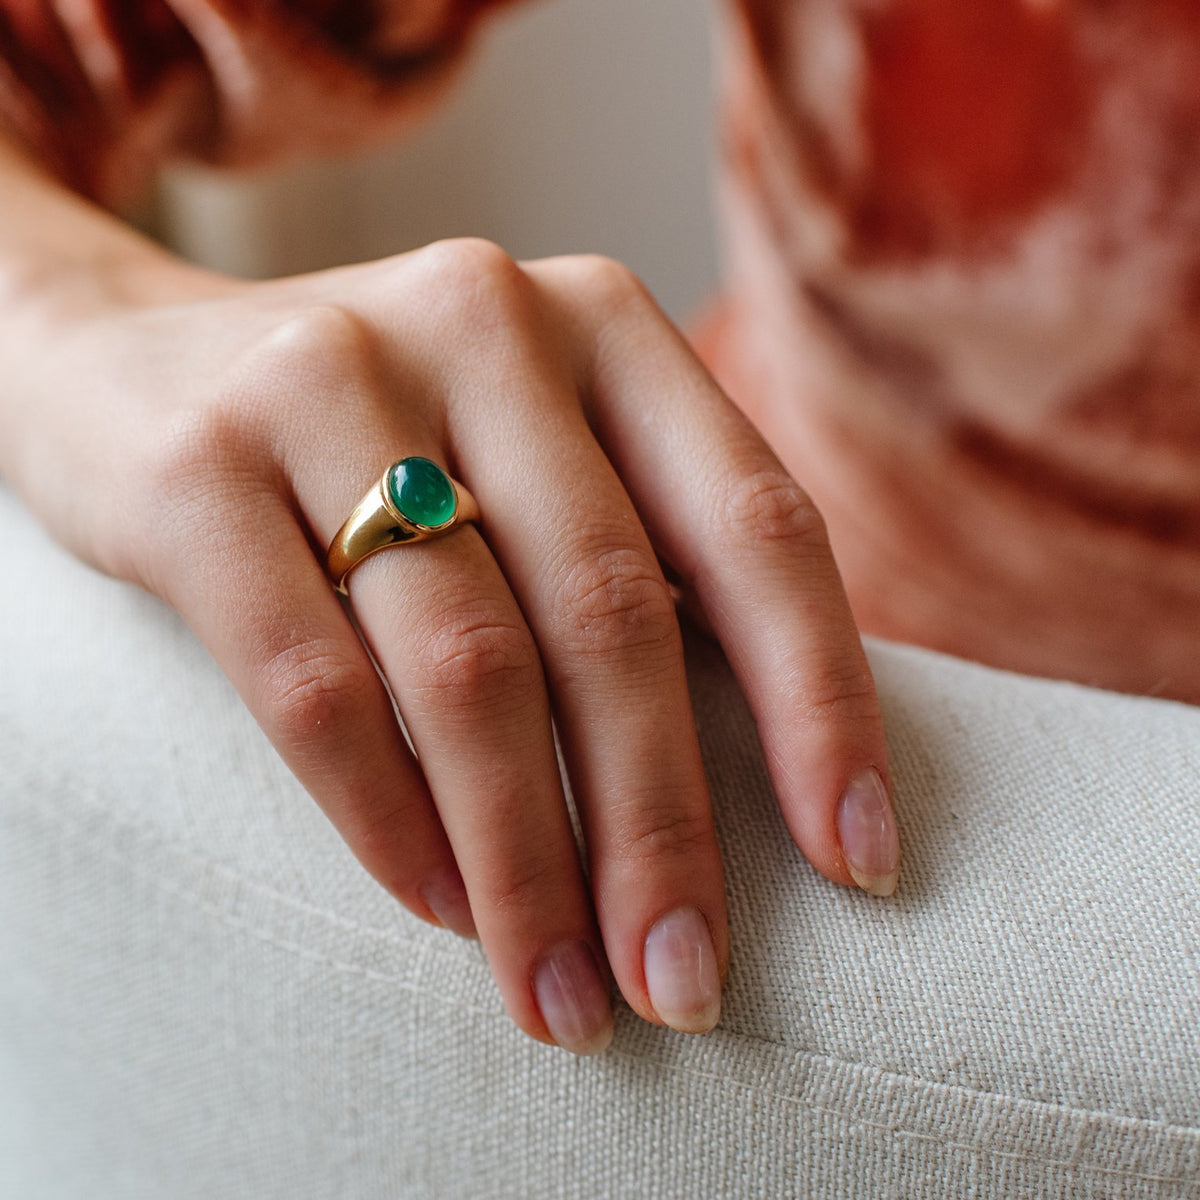 GLEE OVAL SIGNET RING - GREEN ONYX &amp; GOLD - SO PRETTY CARA COTTER